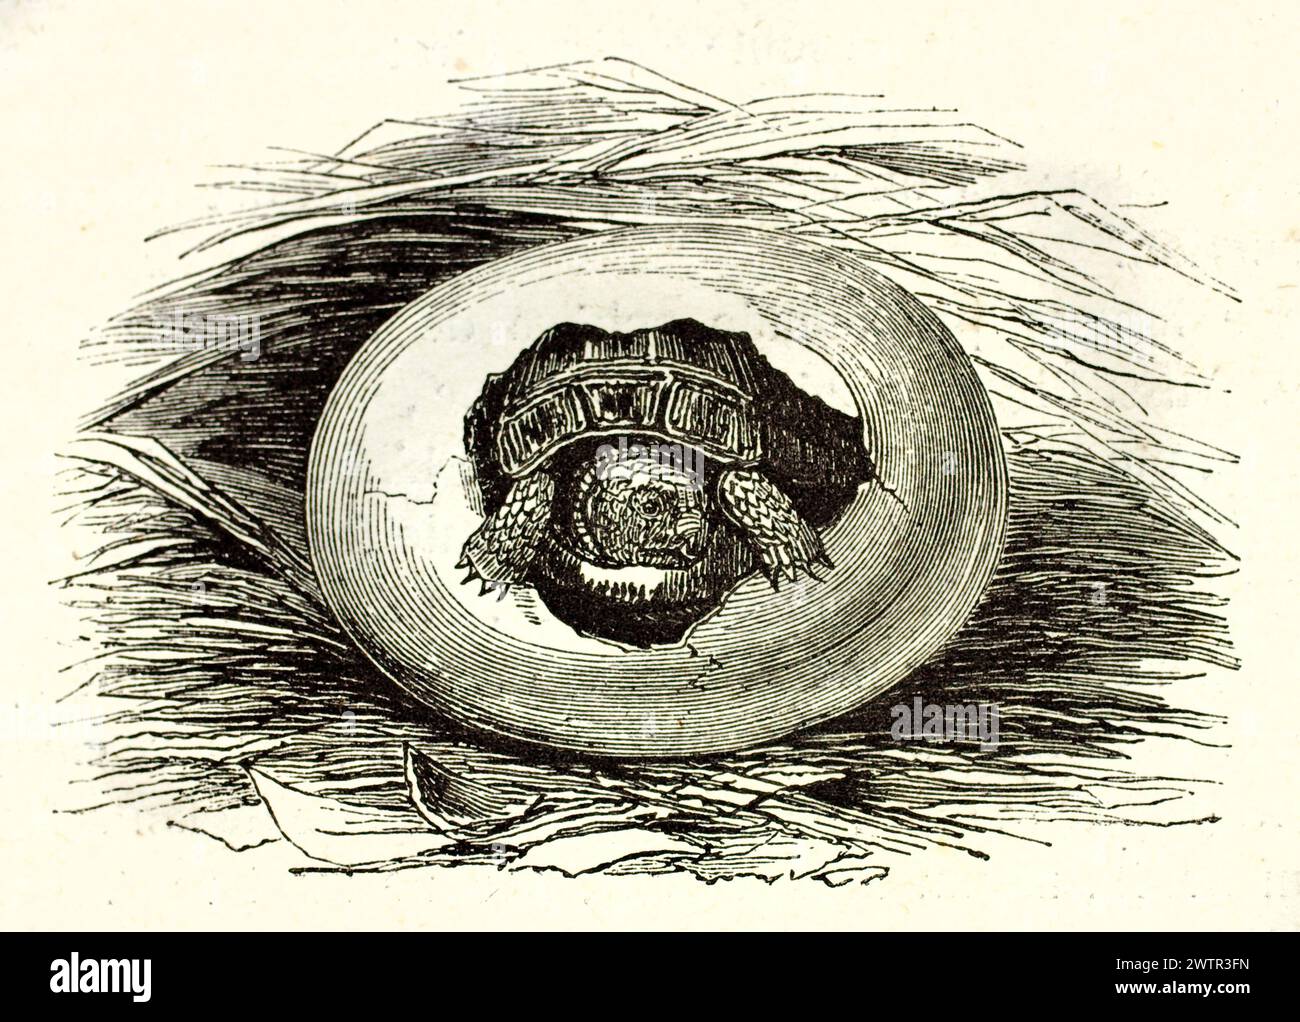 Old engraved illustration of baby turtle hatching. By unknown author, published on Magasin Pittoresque, Paris, 1852. Stock Photo